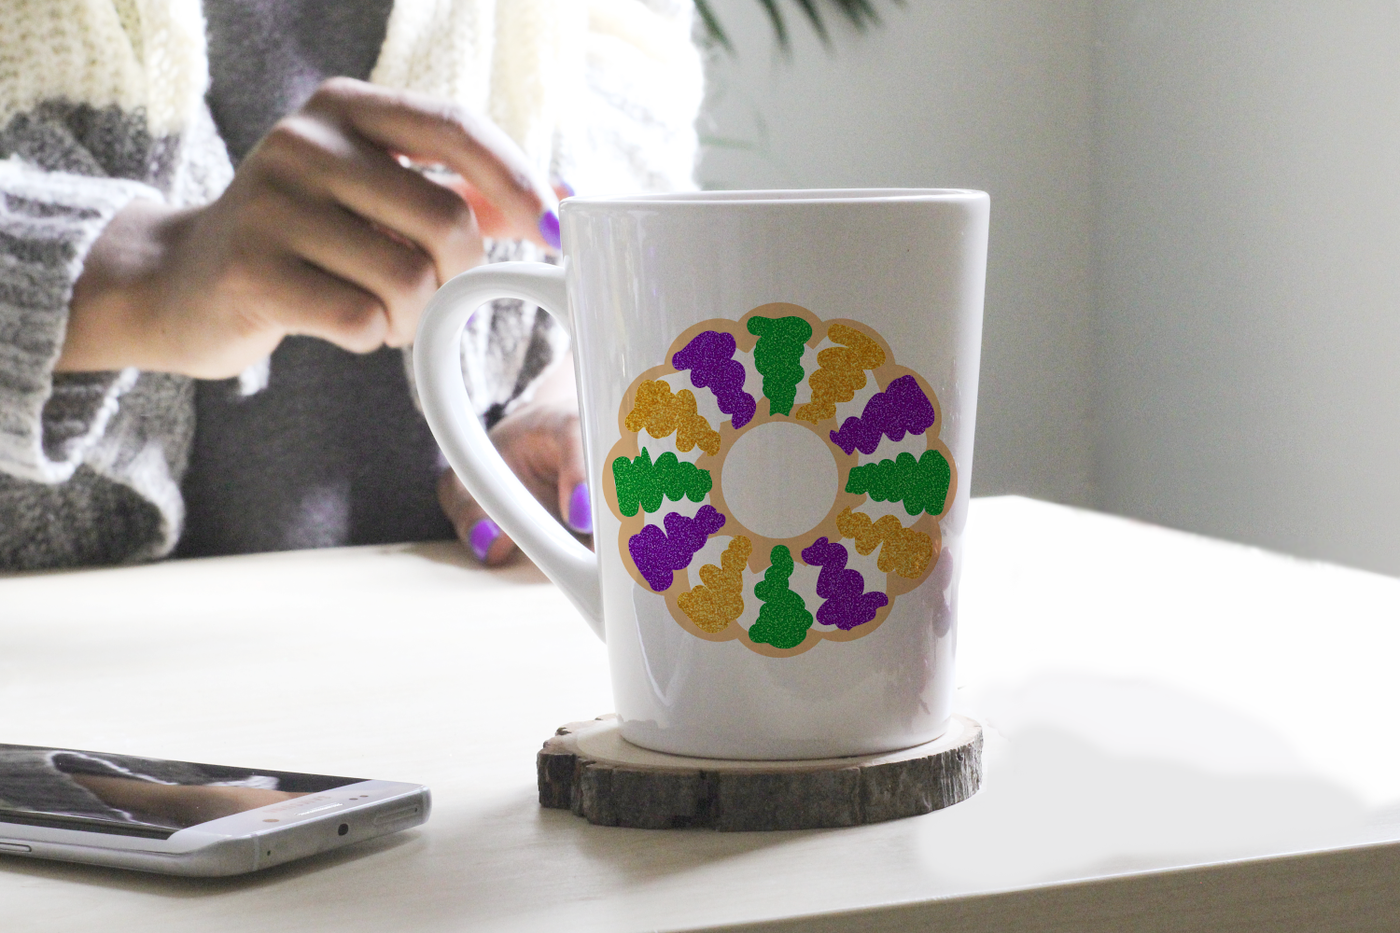 Black woman reaching for a mug with a King Cake design.